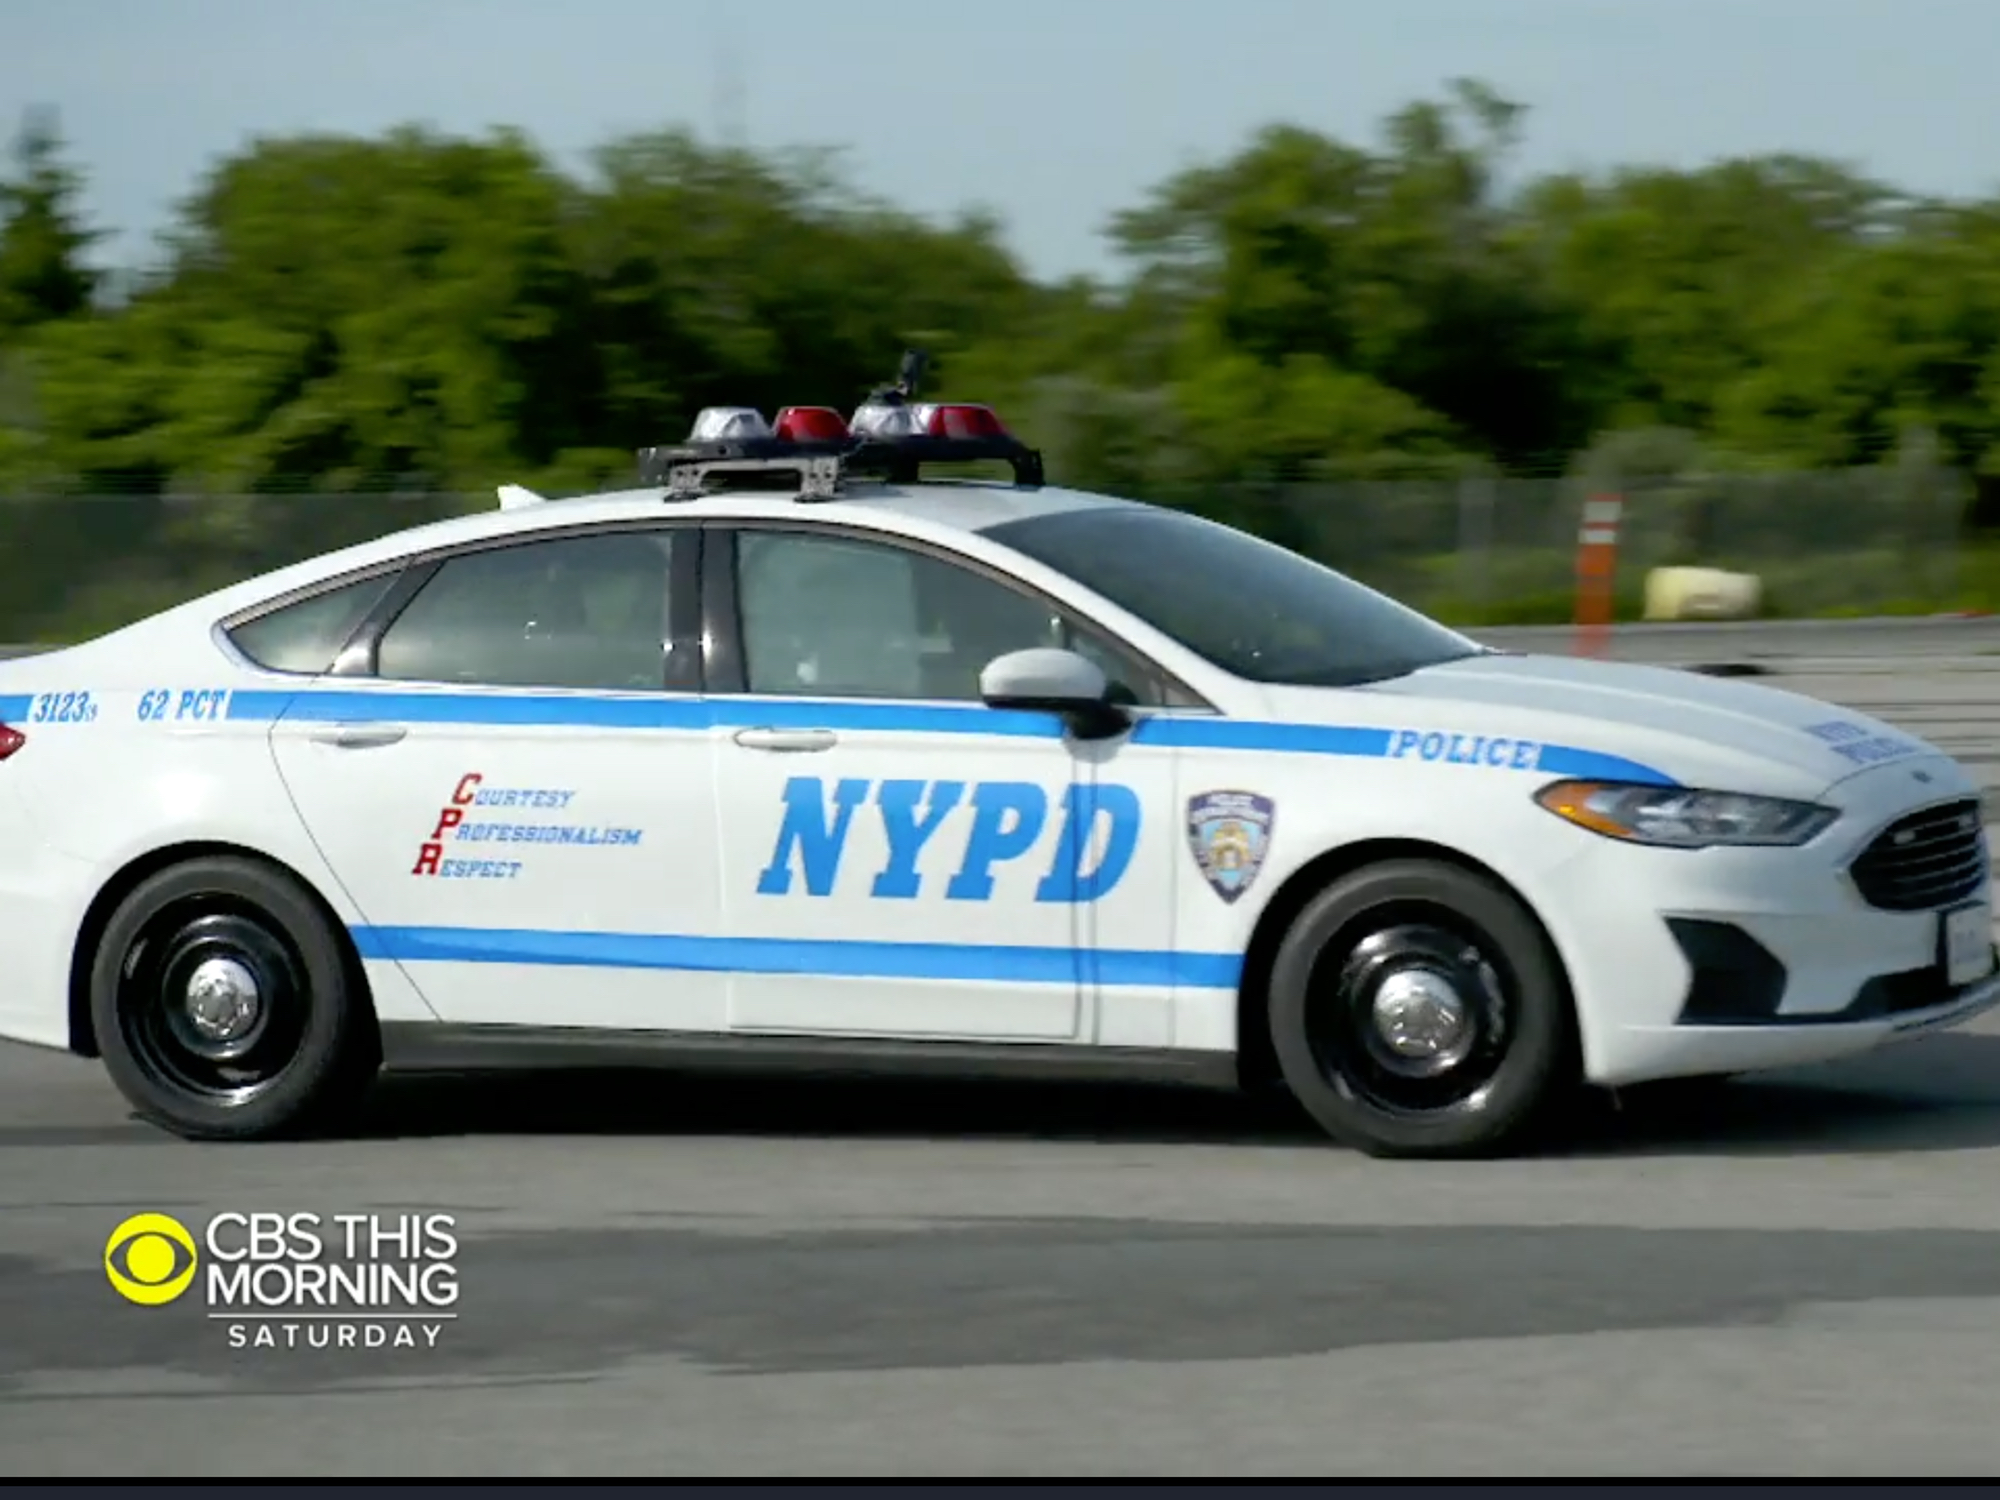 Ford-hybrid-police-vehicle-report-002.jp